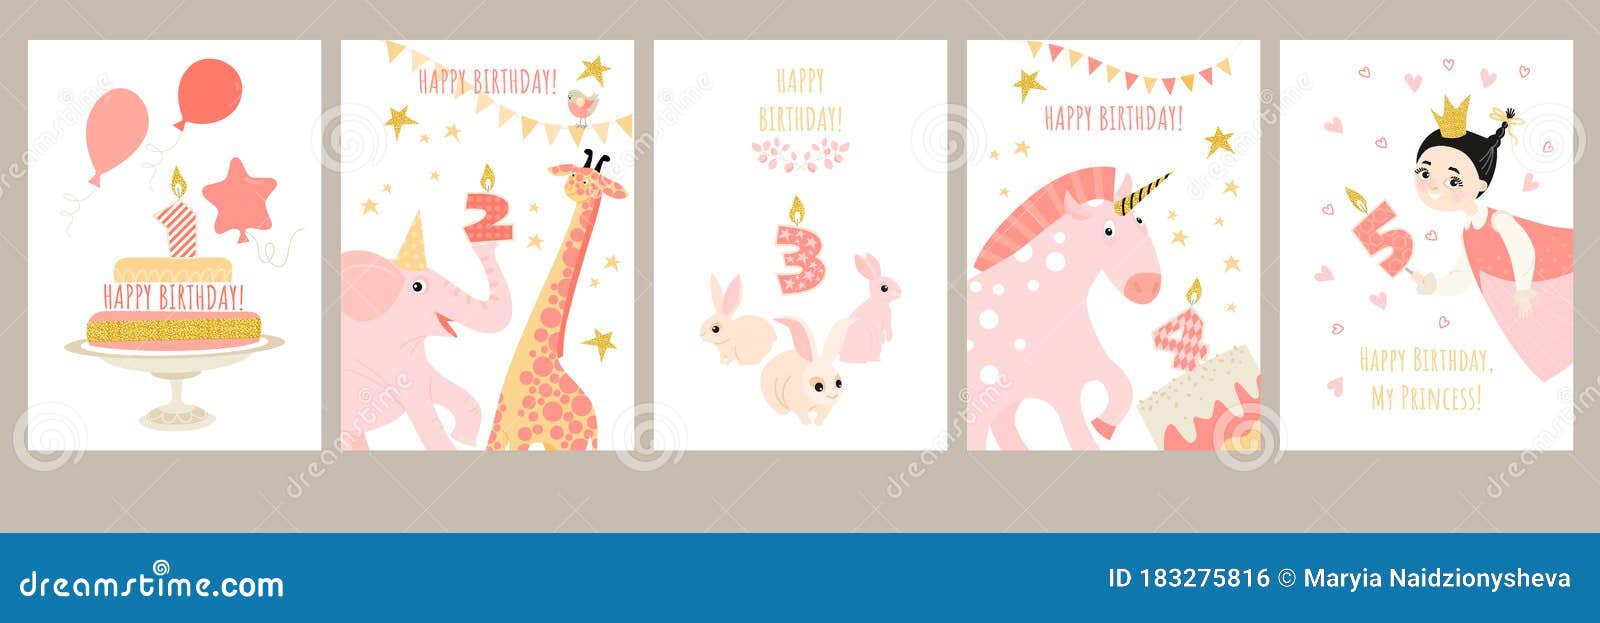 Set of Birthday Cards for Girls with Cute Cartoon Characters, Animals,  Cakes with Candles and Decorations in Pink Stock Vector - Illustration of  decoration, children: 183275816